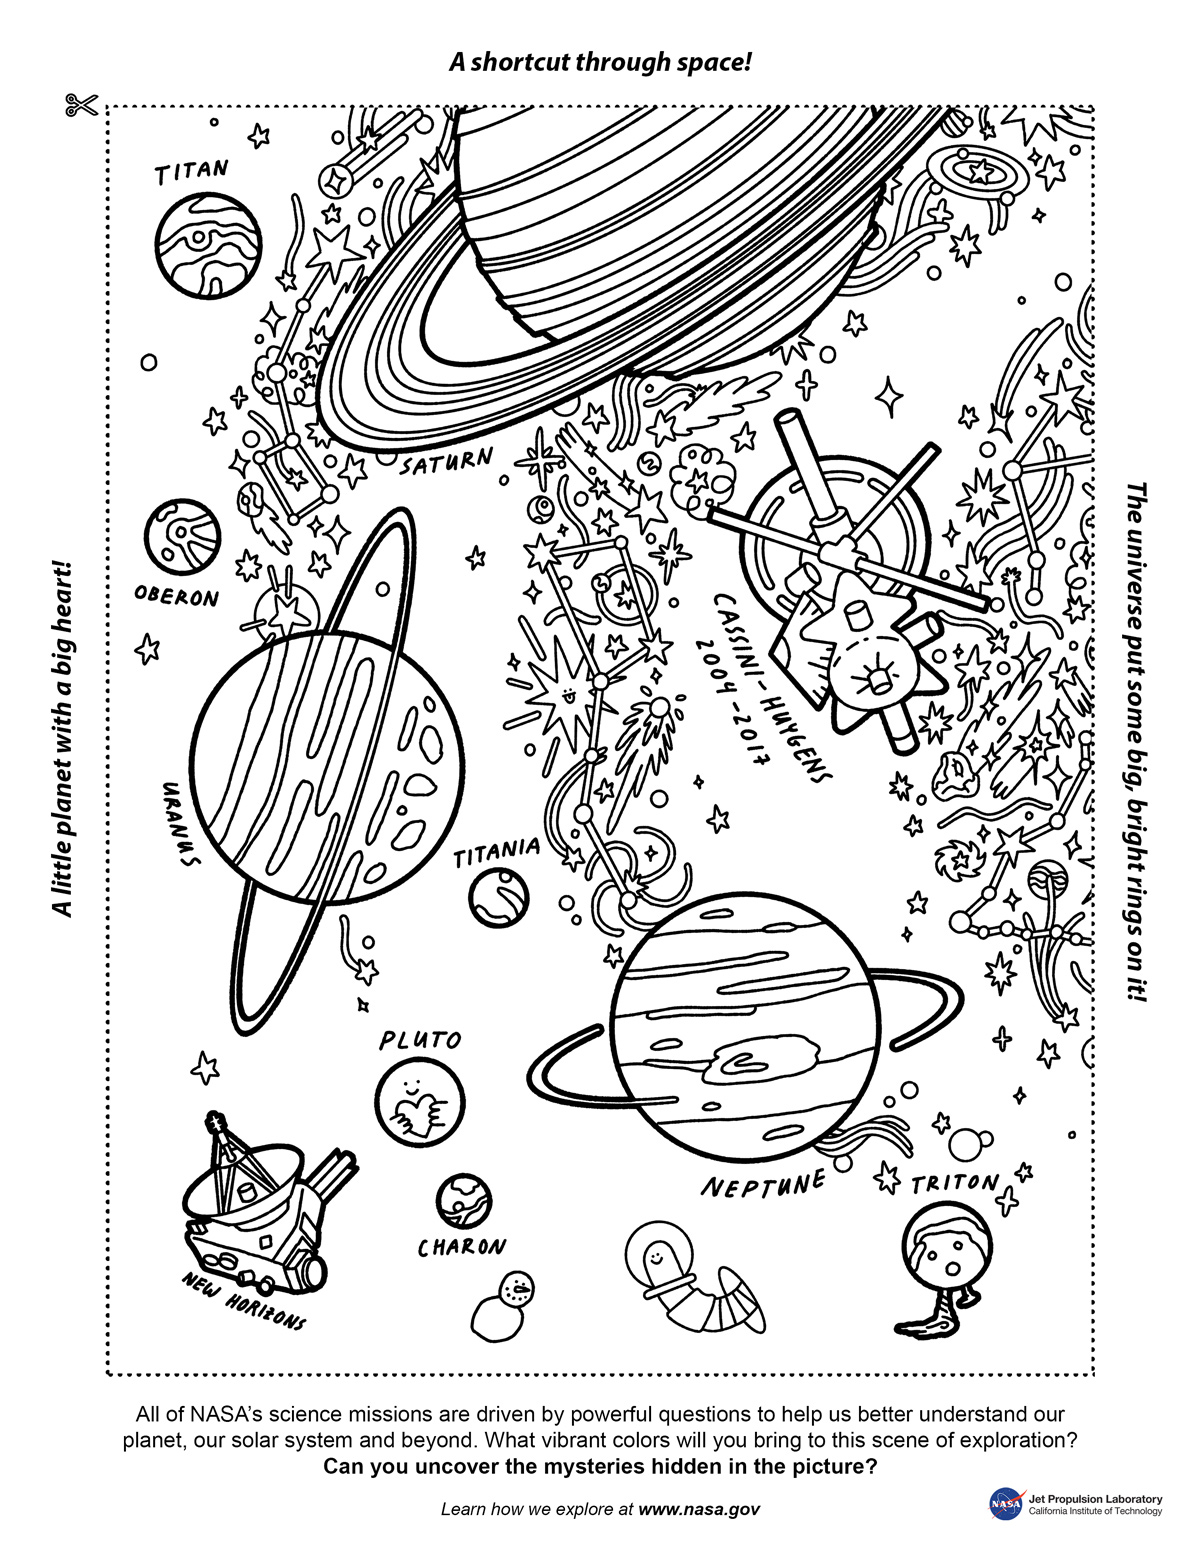 the planets in our solar system in black and white color